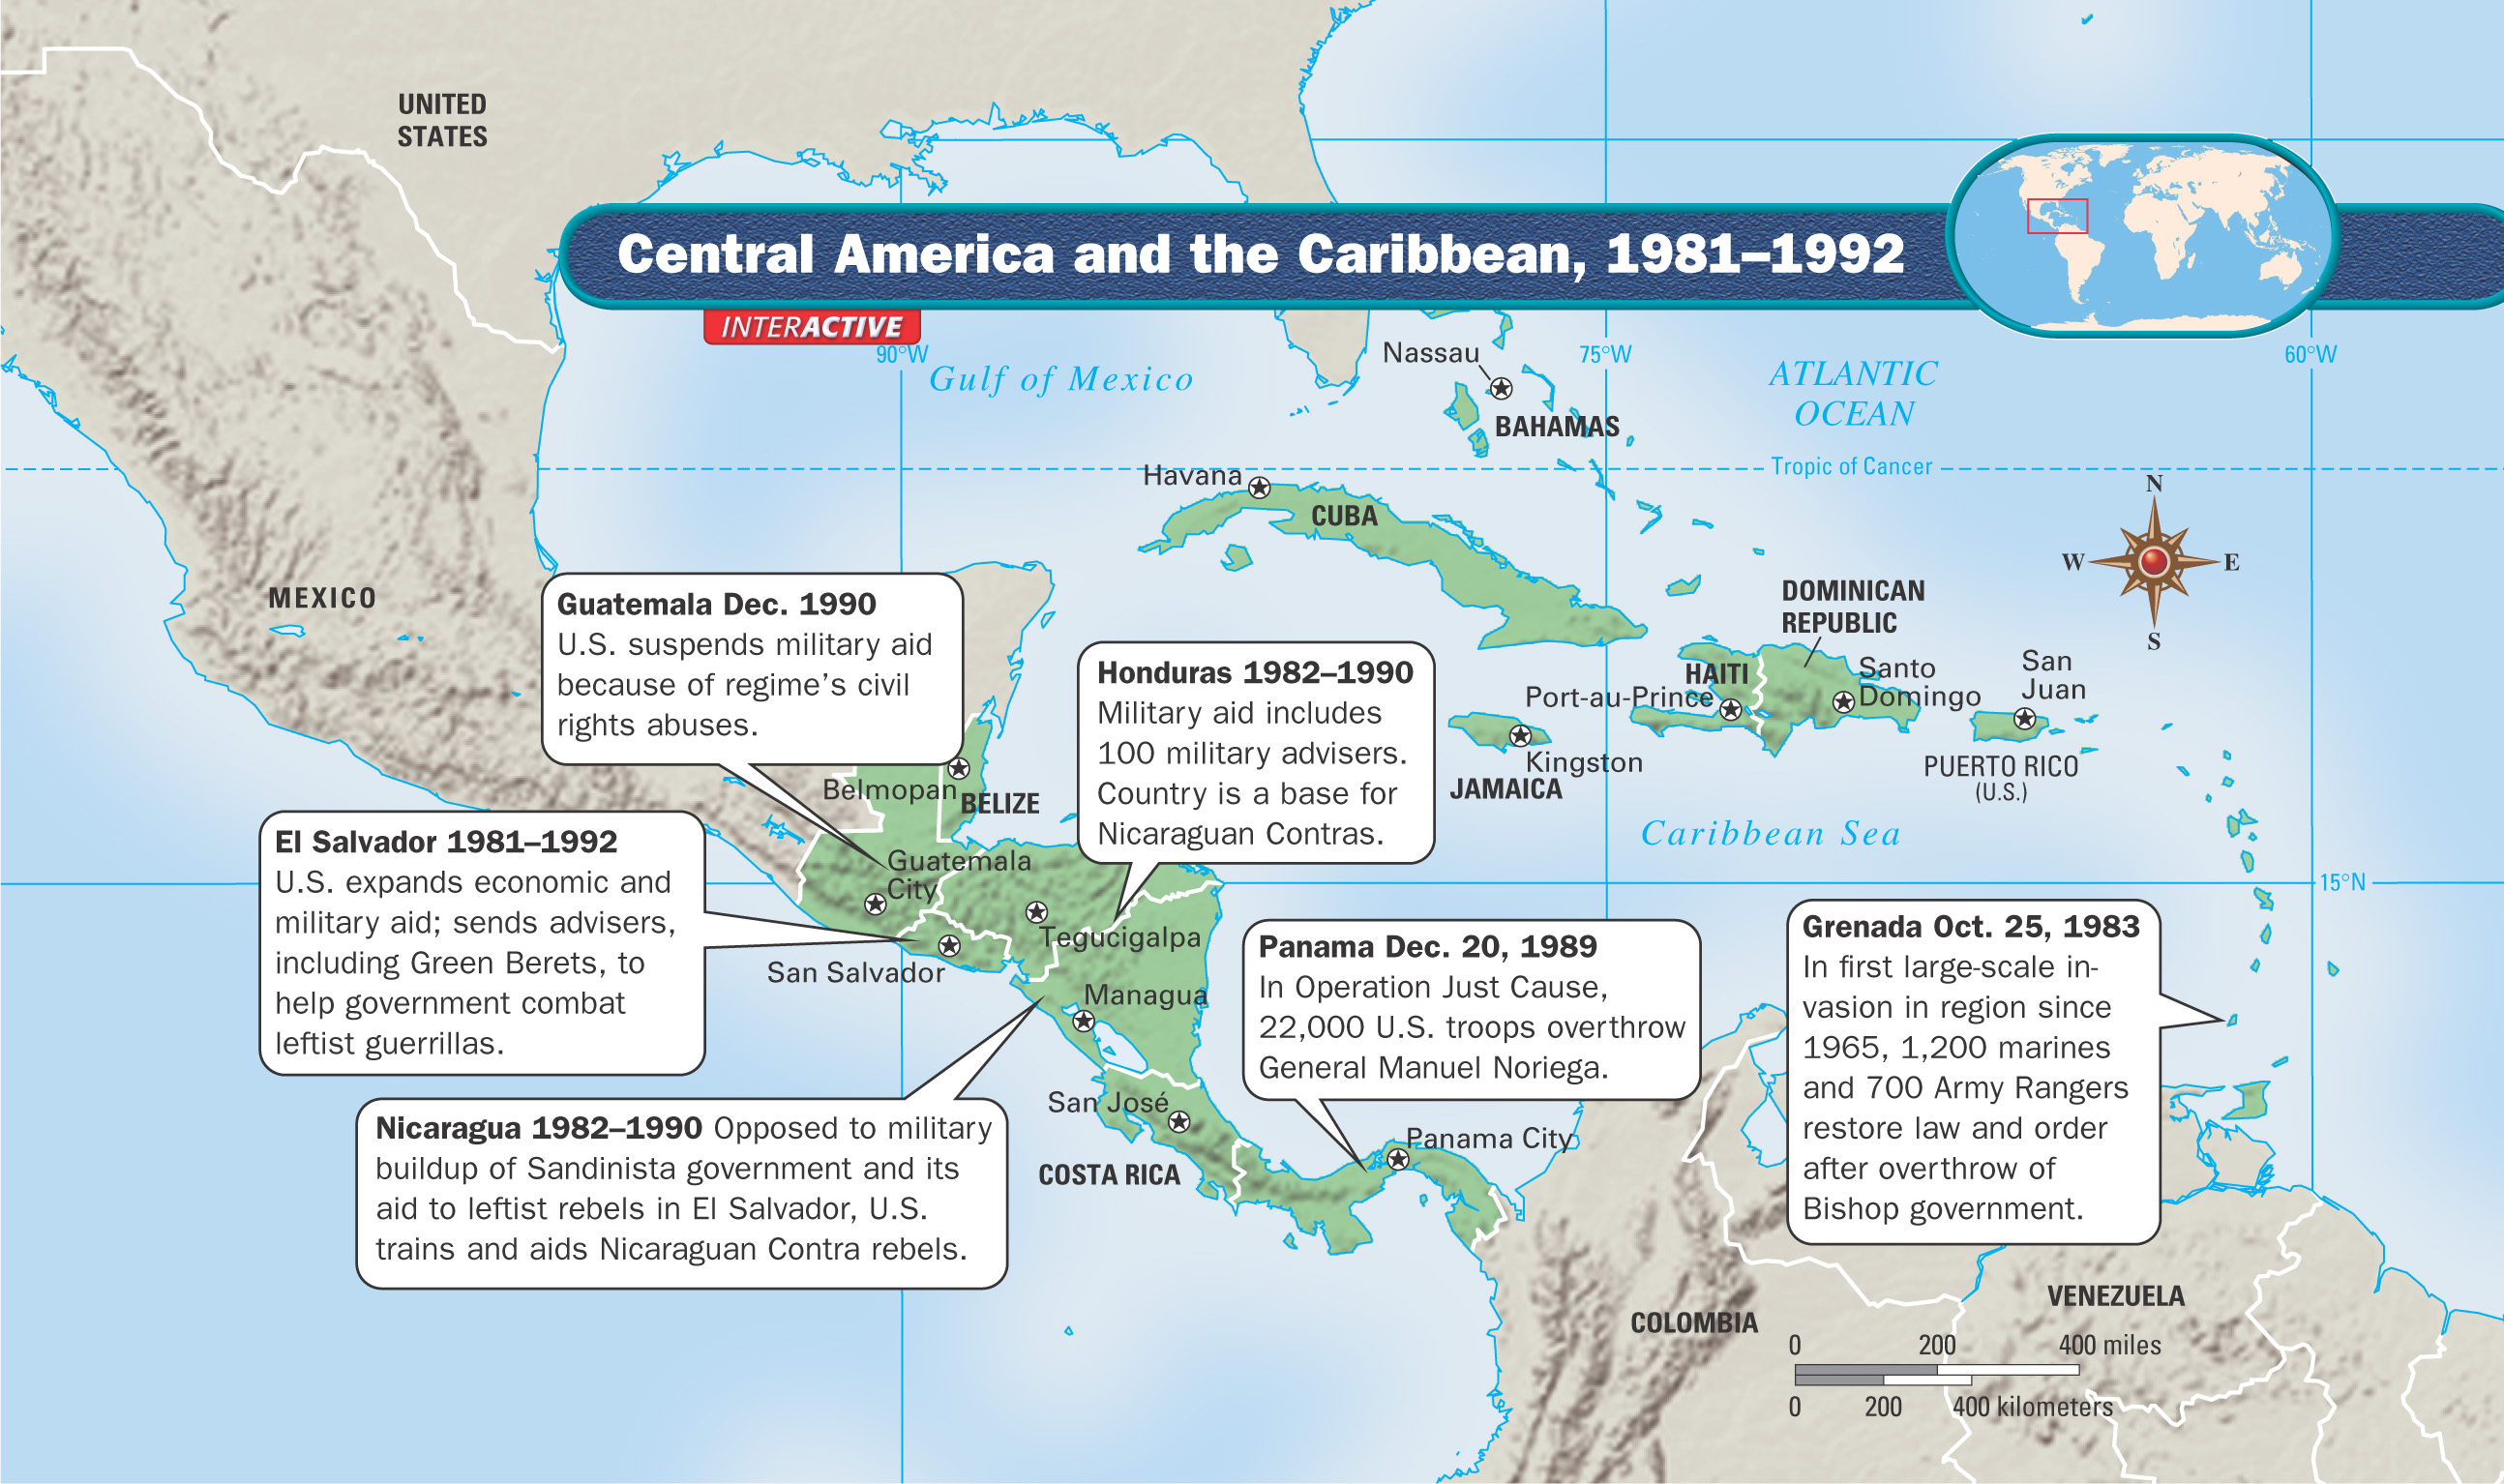 A map: Central America and the Caribbean, 1981-1992.